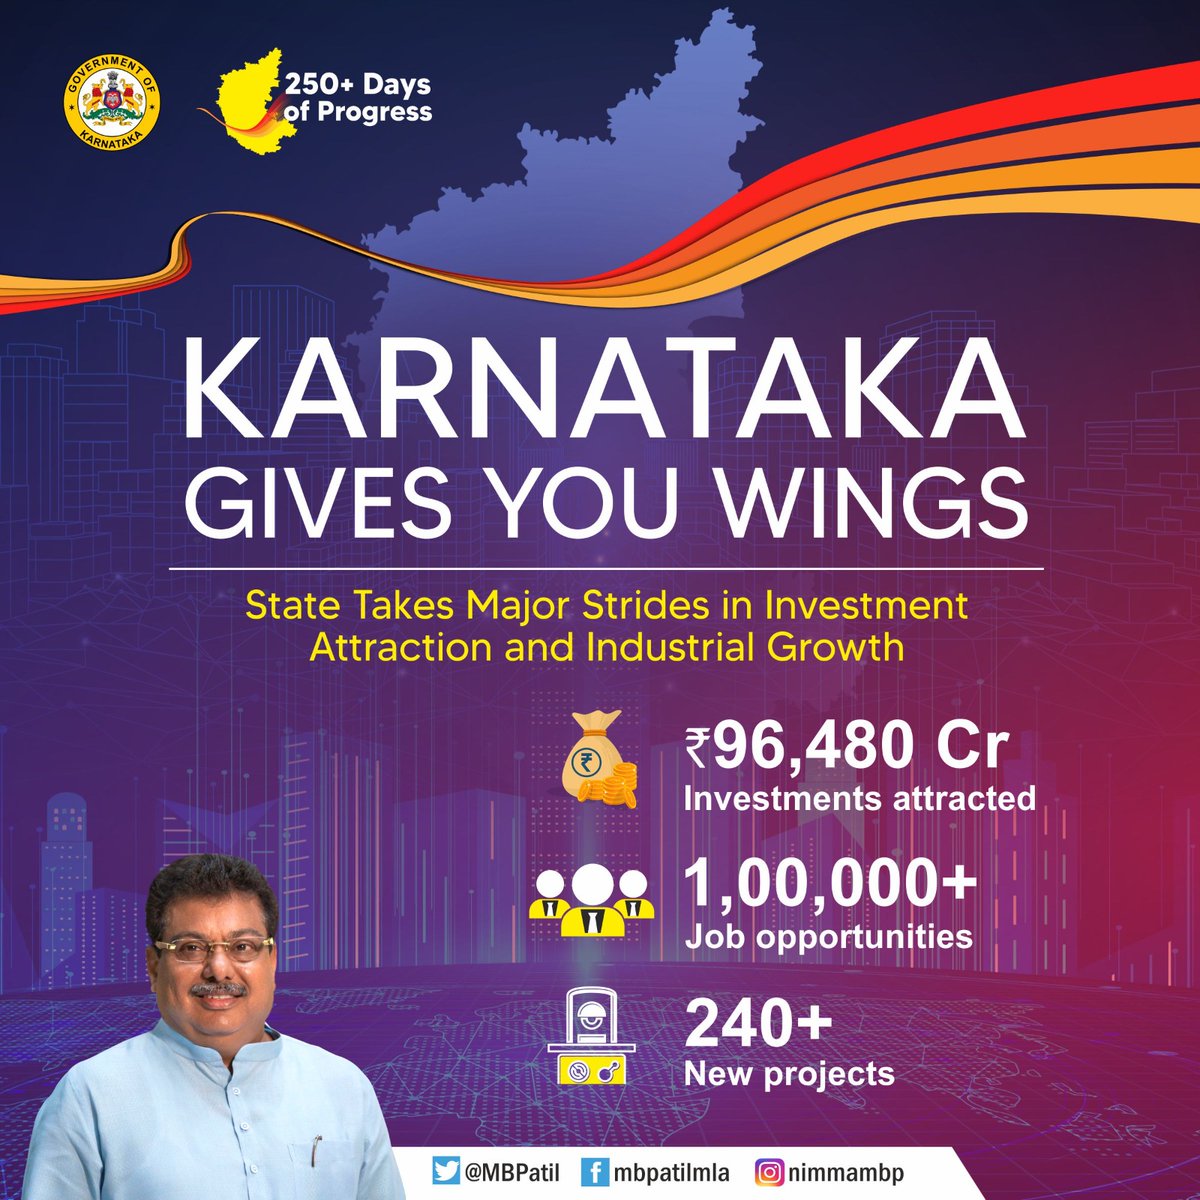 State Takes Major Strides in Investment Attraction and Industrial Growth With an investment exceeding 96,000 crores and the creation of 100,000+ job opportunities, Karnataka is poised for a transformative impact on its economic landscape. #KarnatakaGrowthStory #KarnatakaForIndia